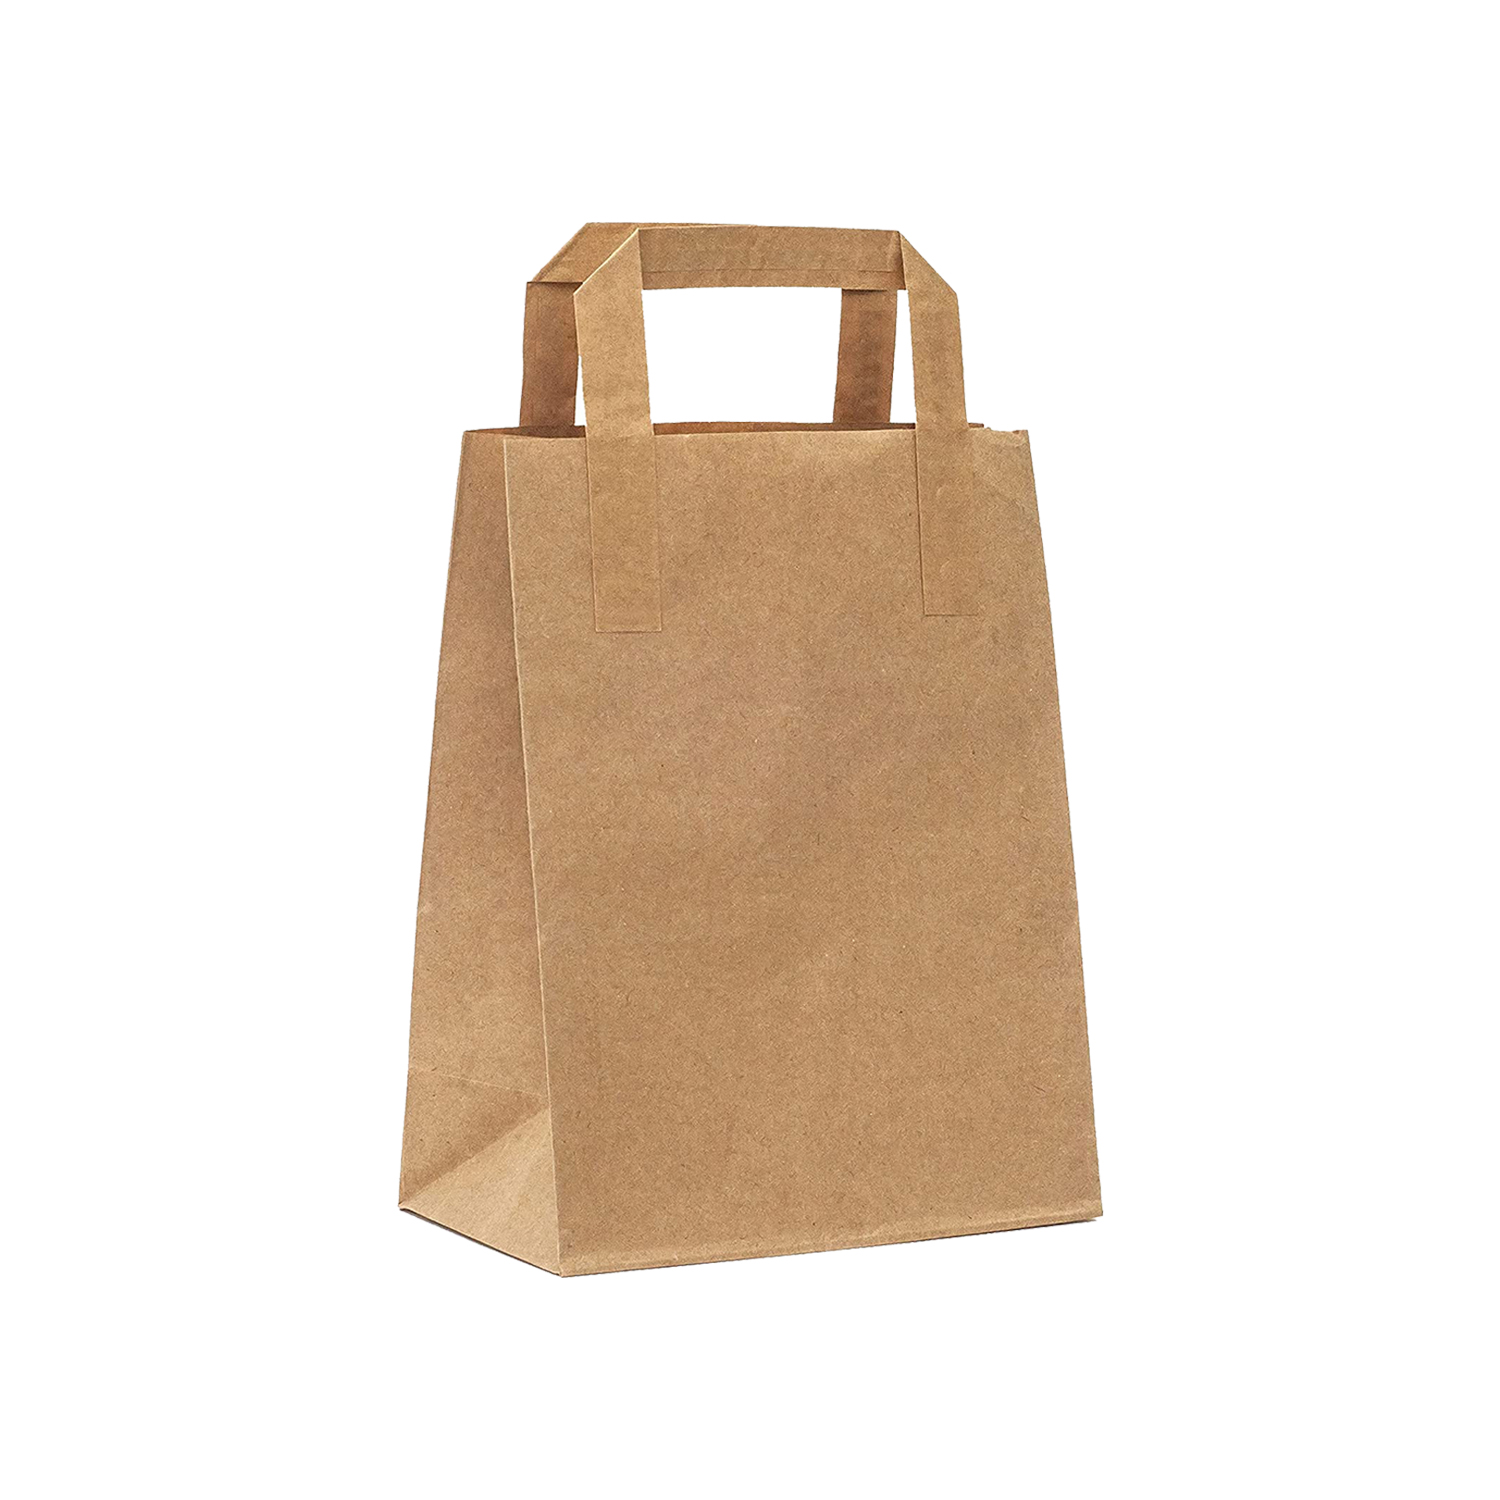  SOS Paper Bags With Flat Handles